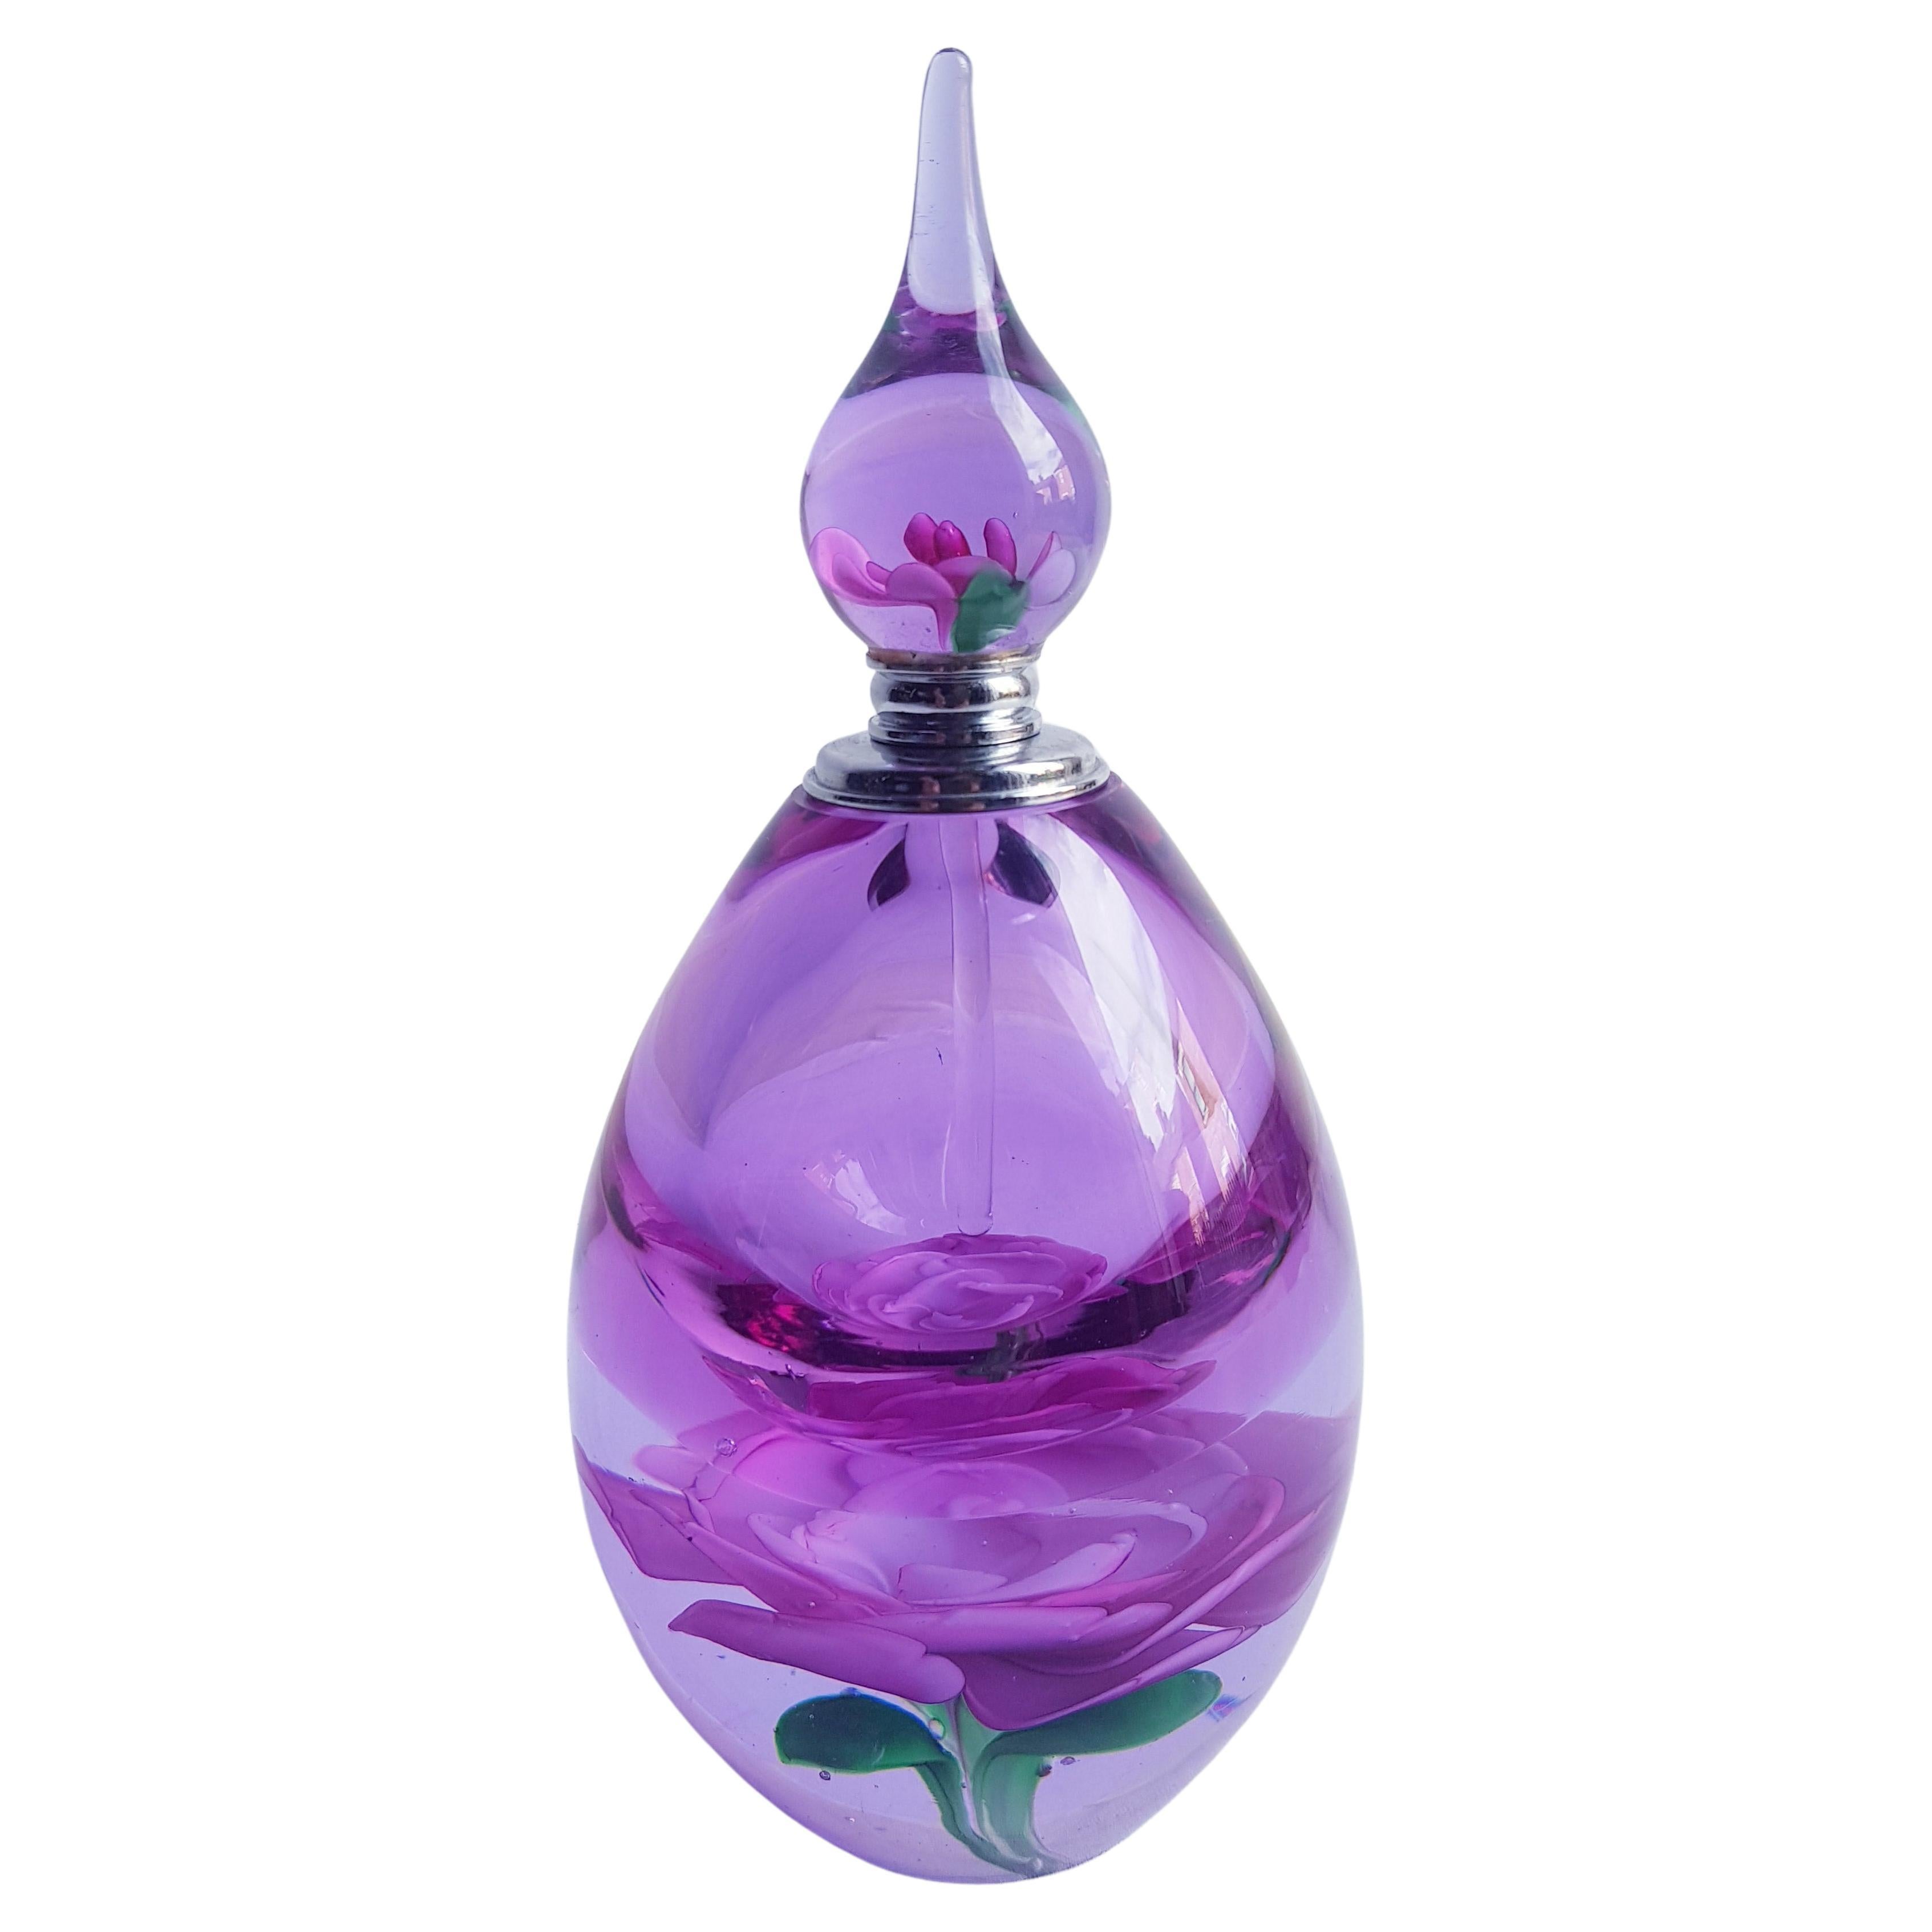 Middle of Century Murano Glass Perfume Bottle